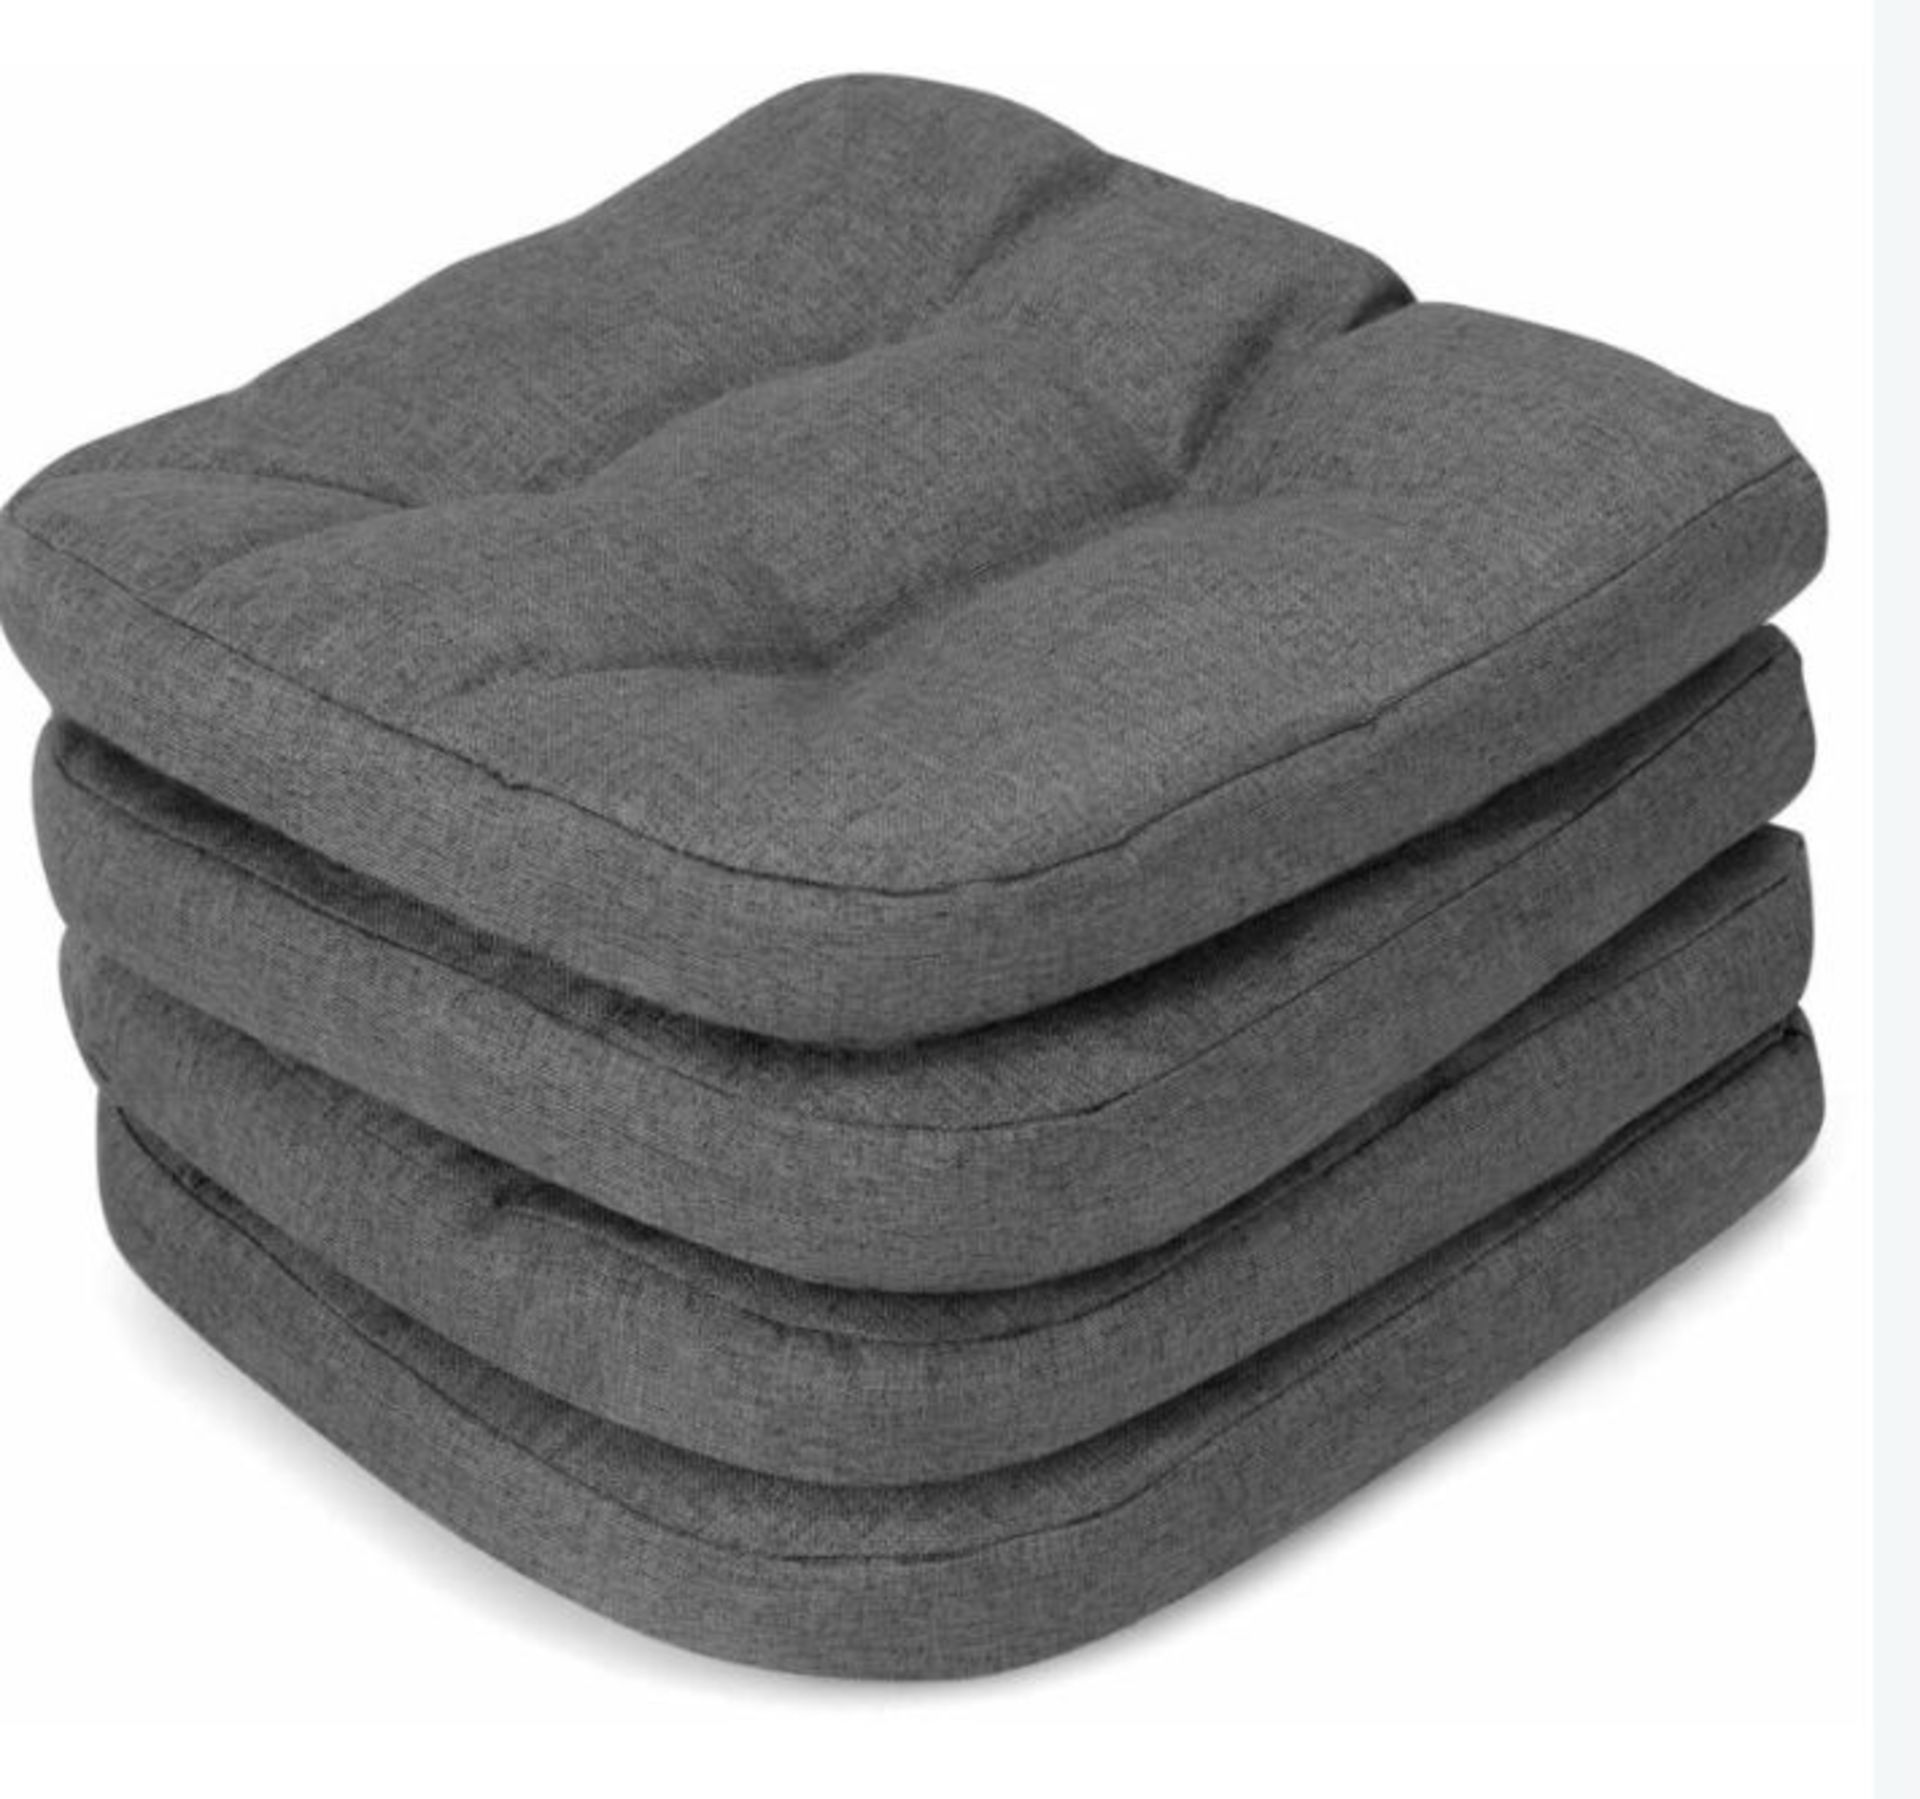 4 Pack Tufted Chair Cushions Skid-Proof Overstuffed Comfortable Cushion Seat Pad. - ER53.